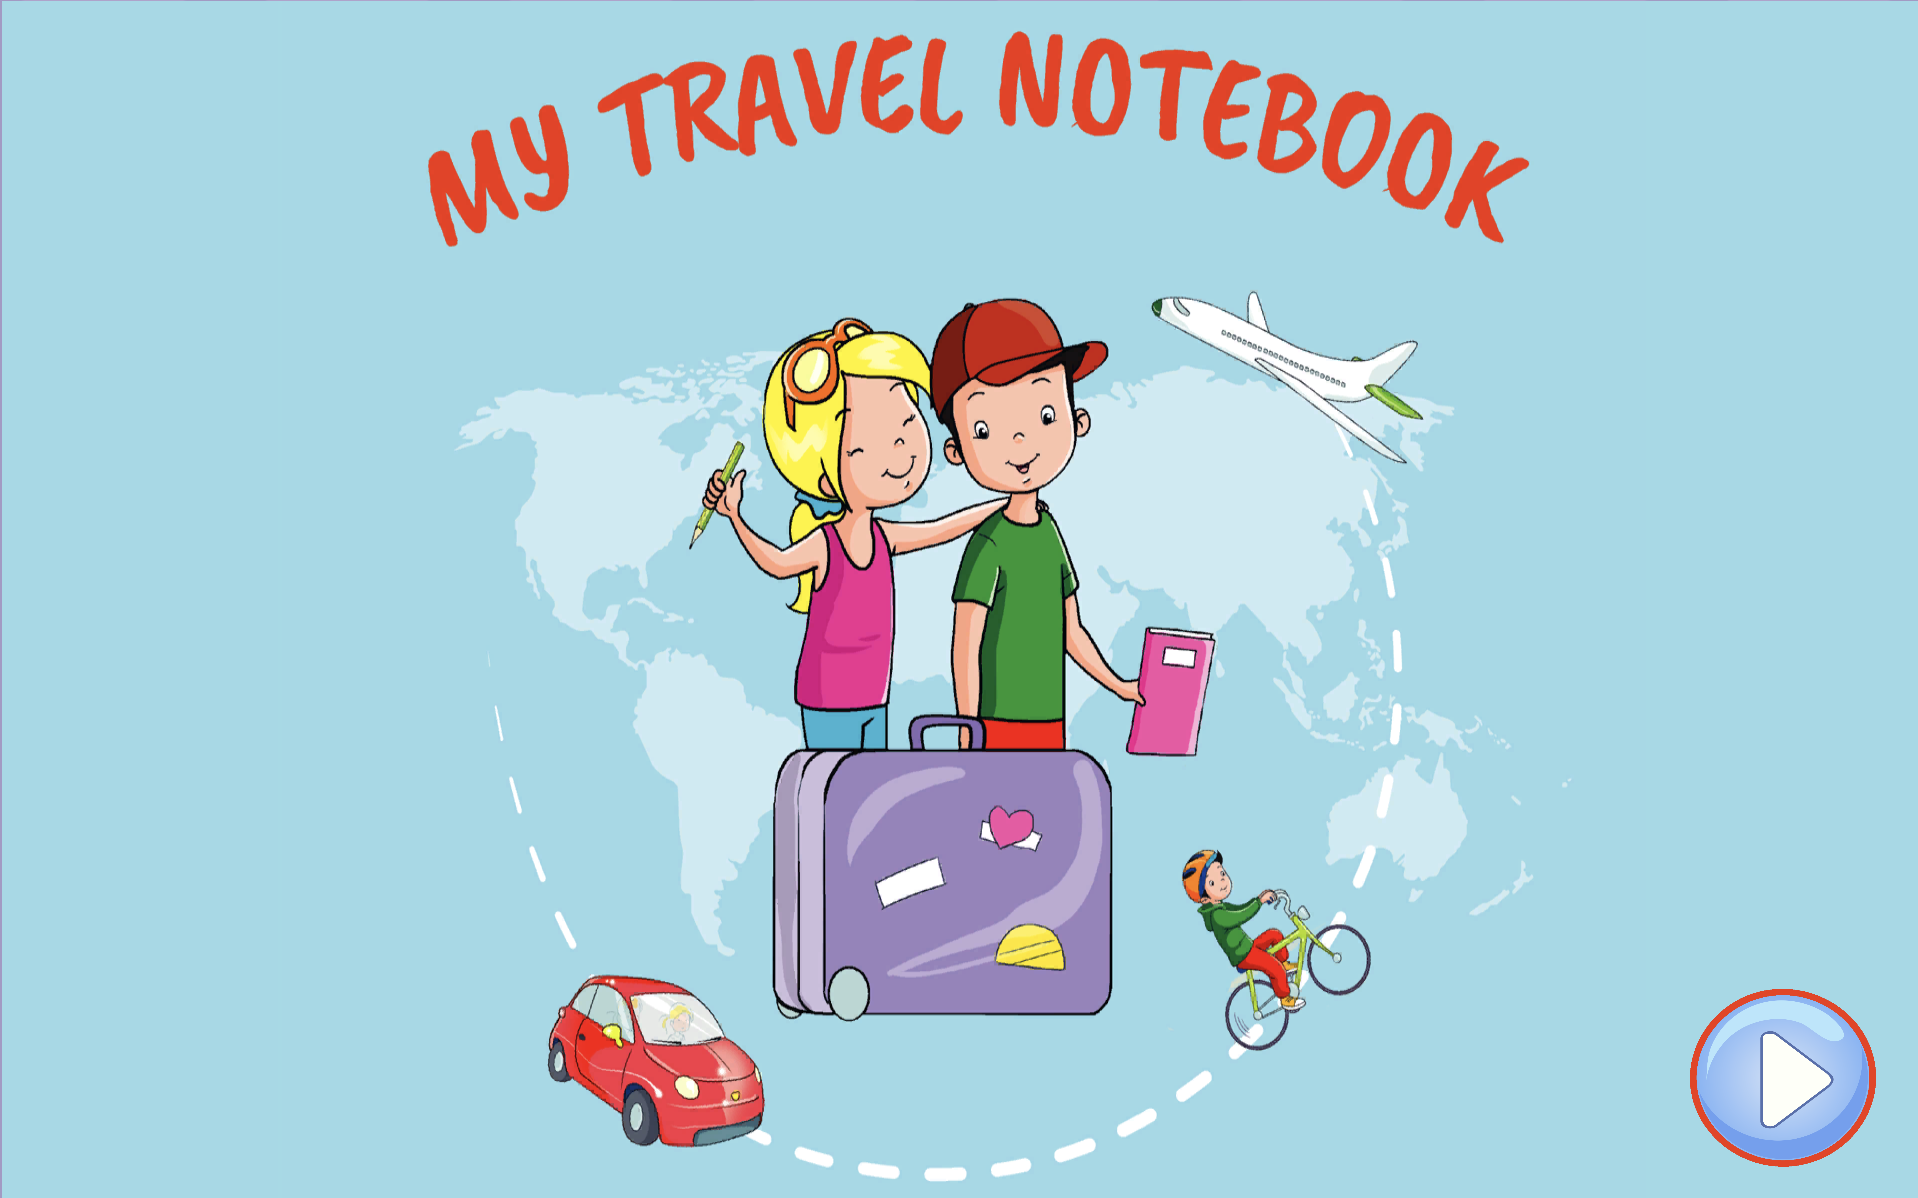 Travel note book